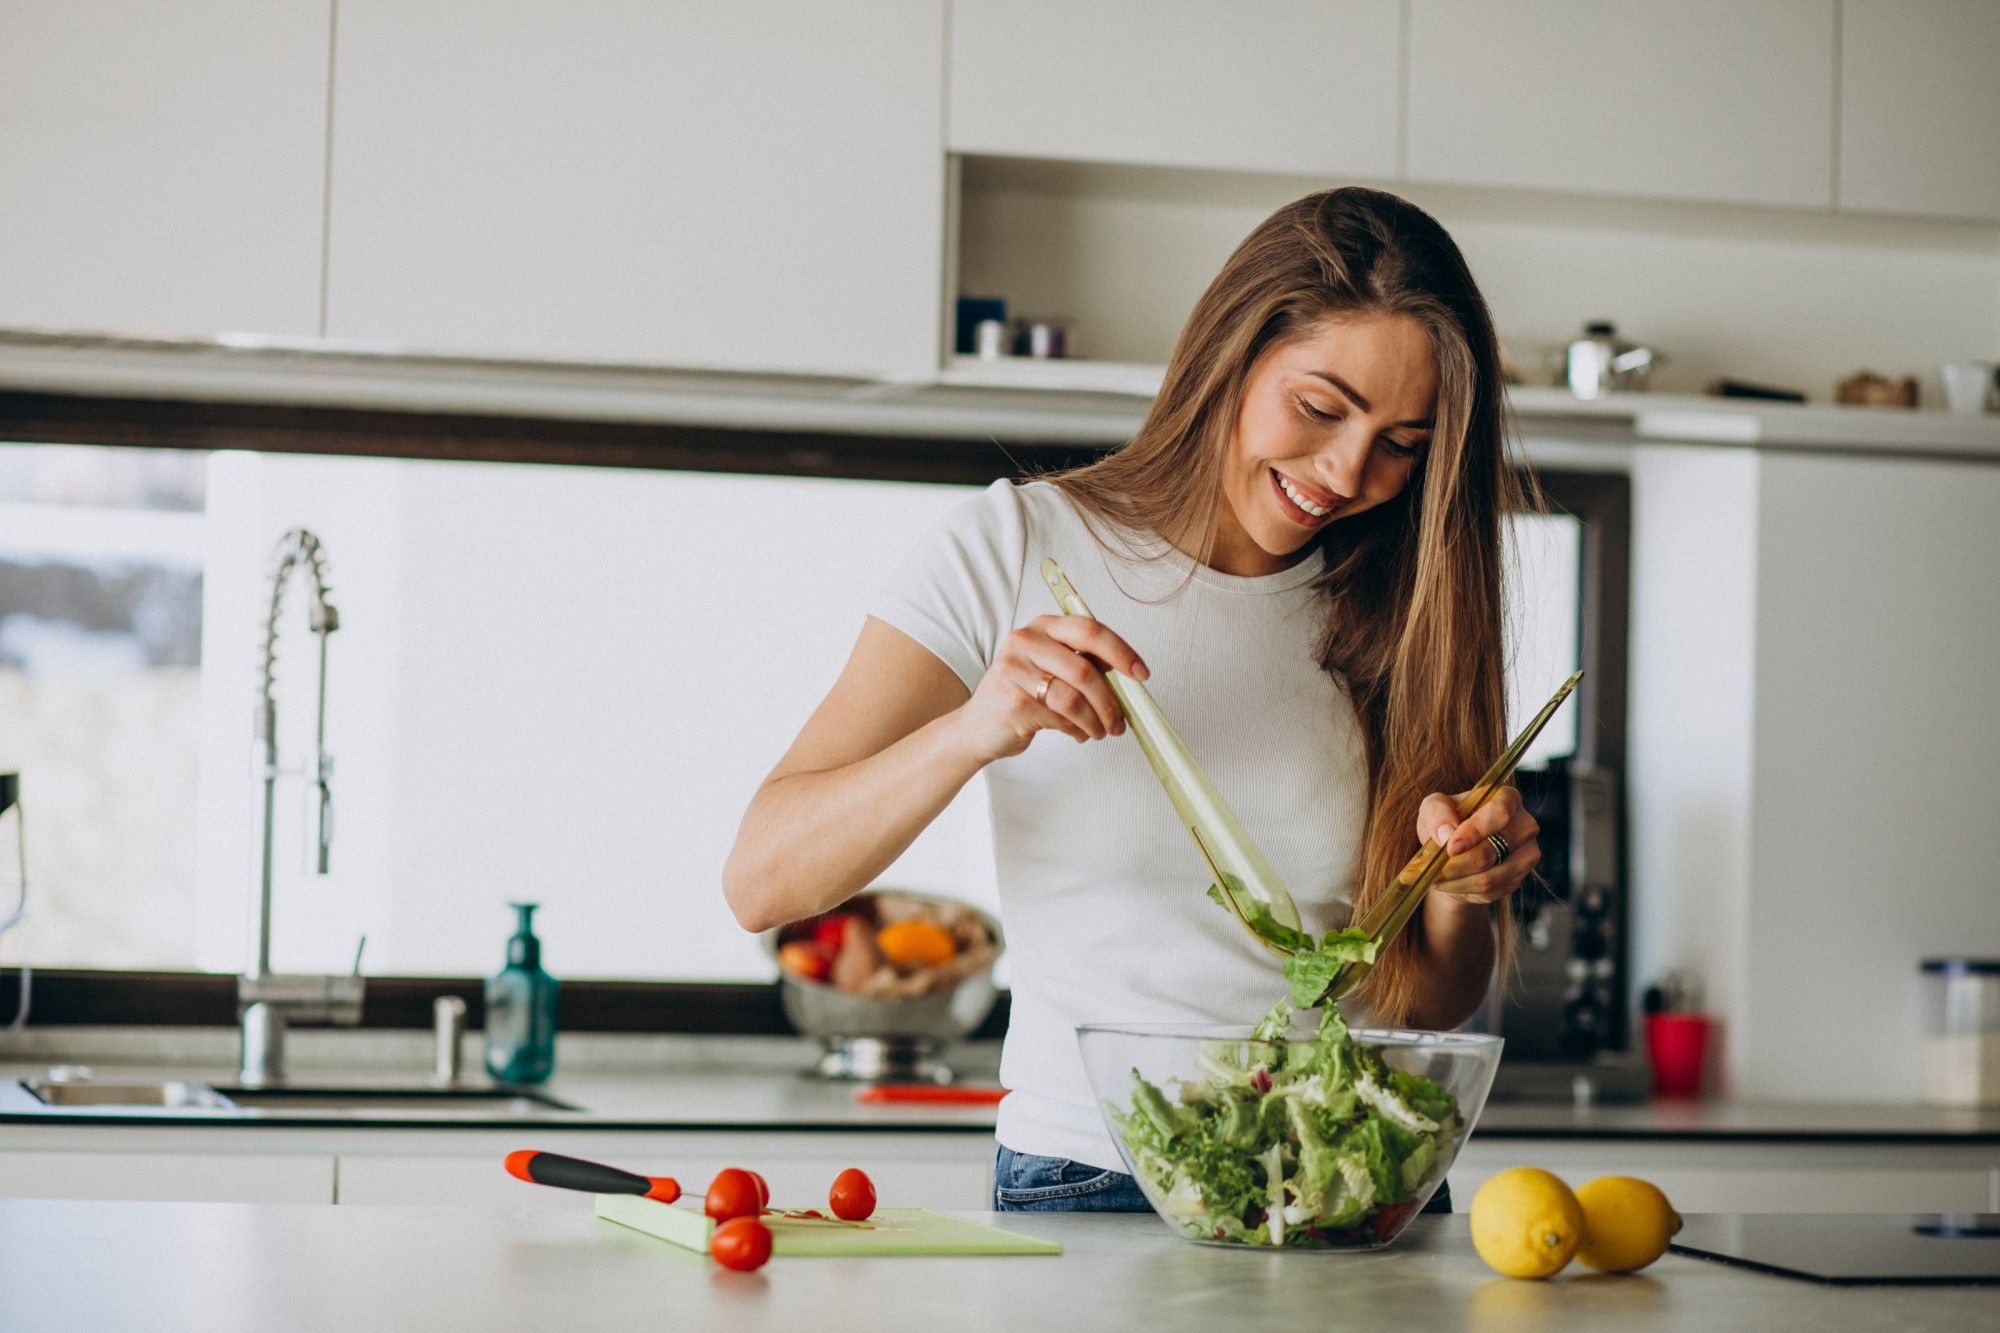 A Woman Prepares A Salad For Dinner.